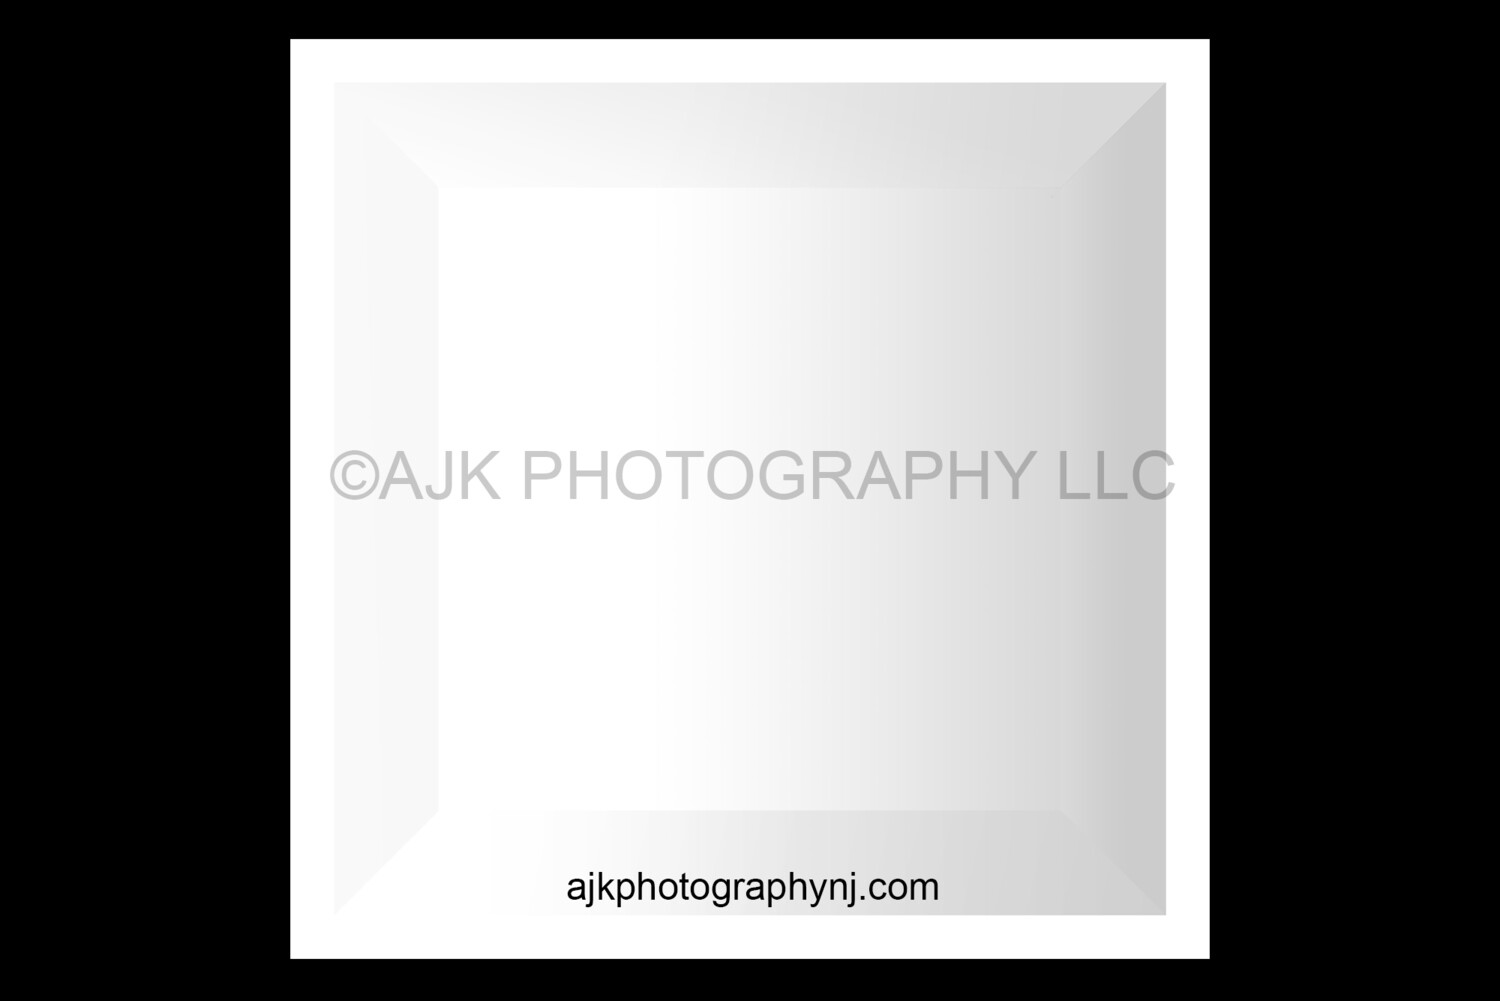 1 white box template PNG Digital Overlay, composite, by Eric Miele from AJK Photography